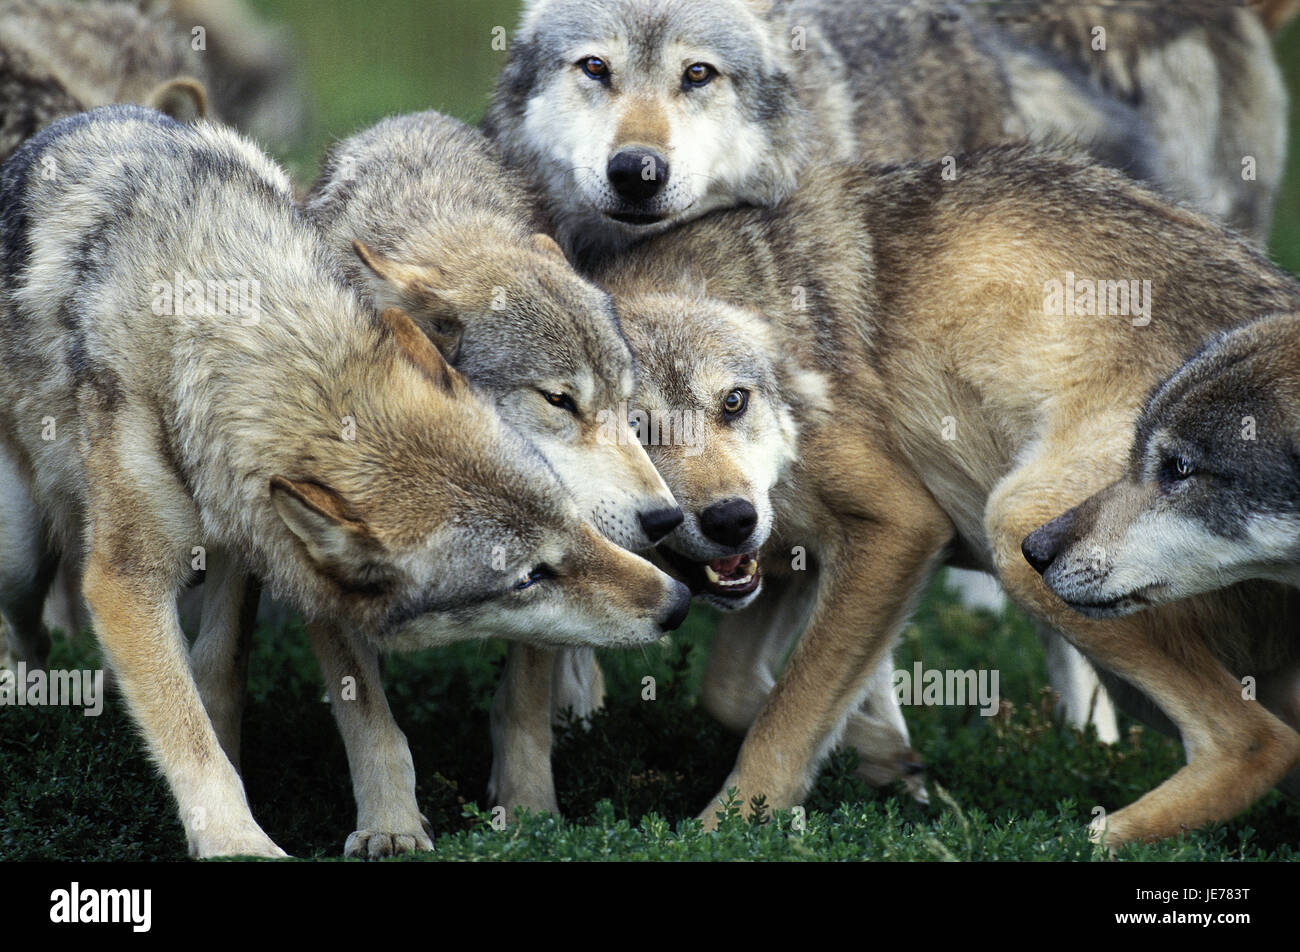 Wolf, Canis lupus, adult animals, herds, Stock Photo